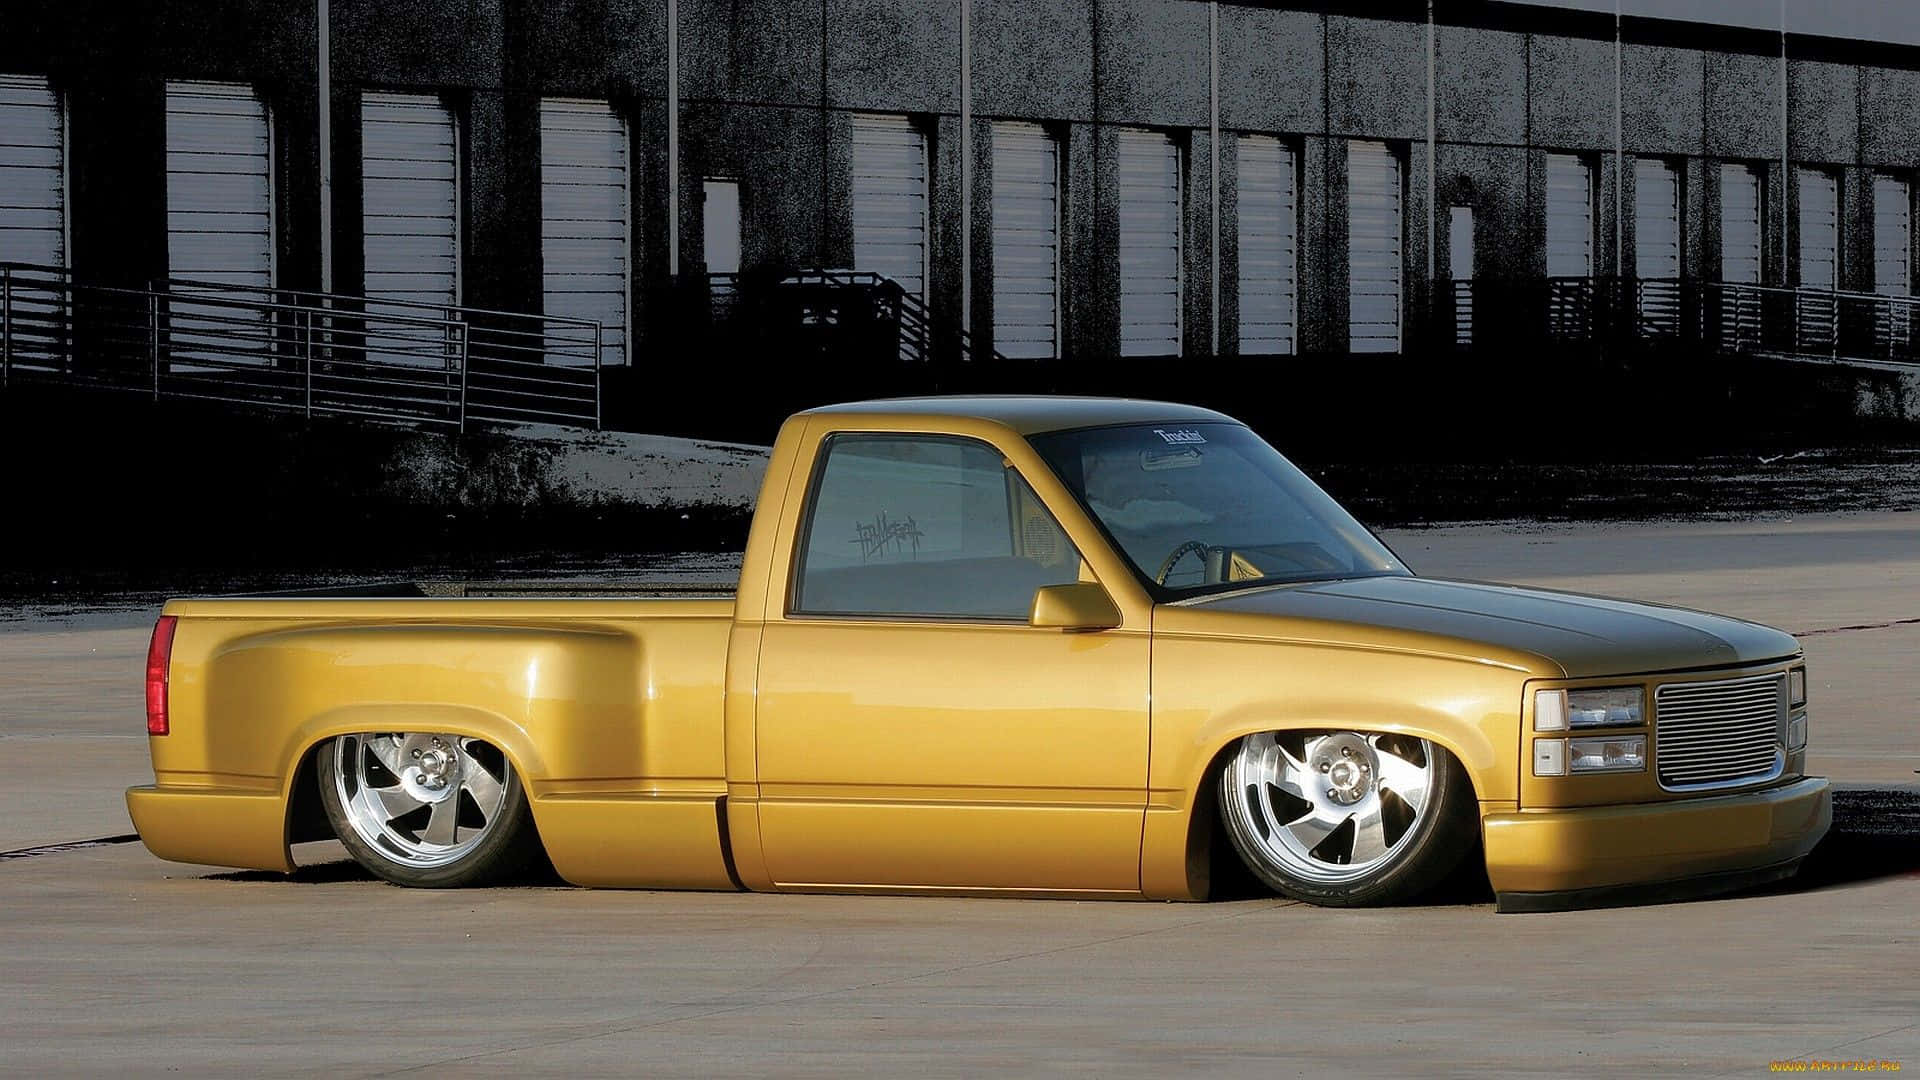 A Yellow Truck Parked In A Parking Lot Wallpaper